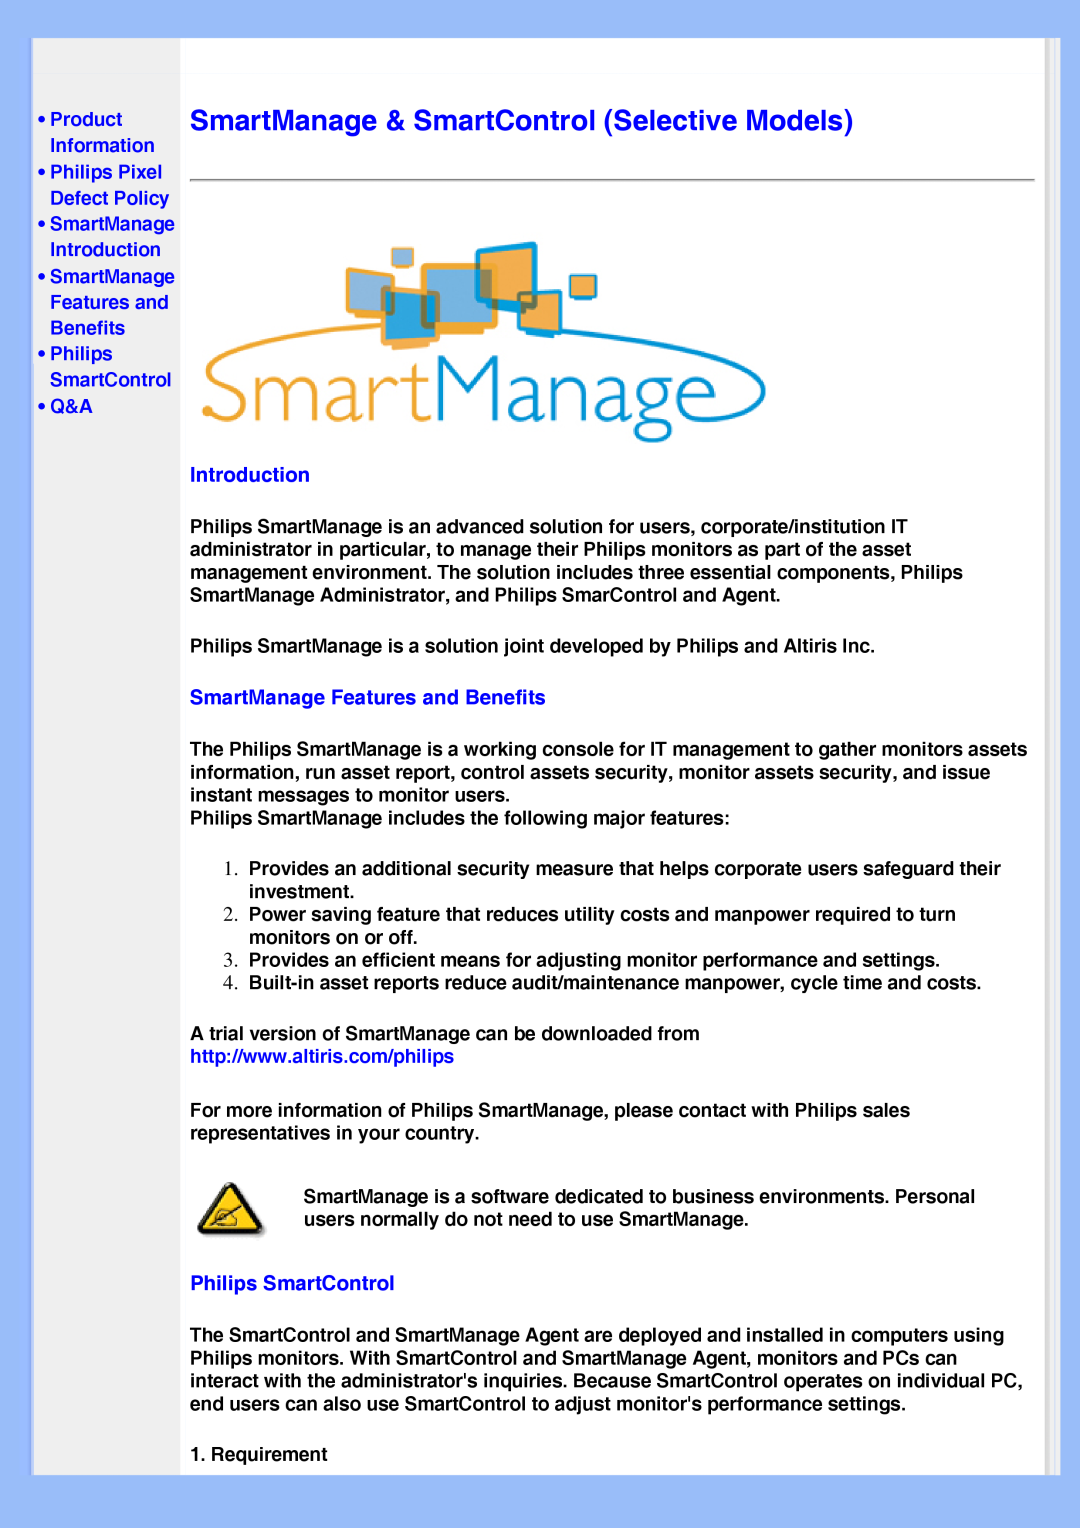 Philips 220VW8 user manual SmartManage & SmartControl Selective Models, Introduction, SmartManage Features and Benefits 